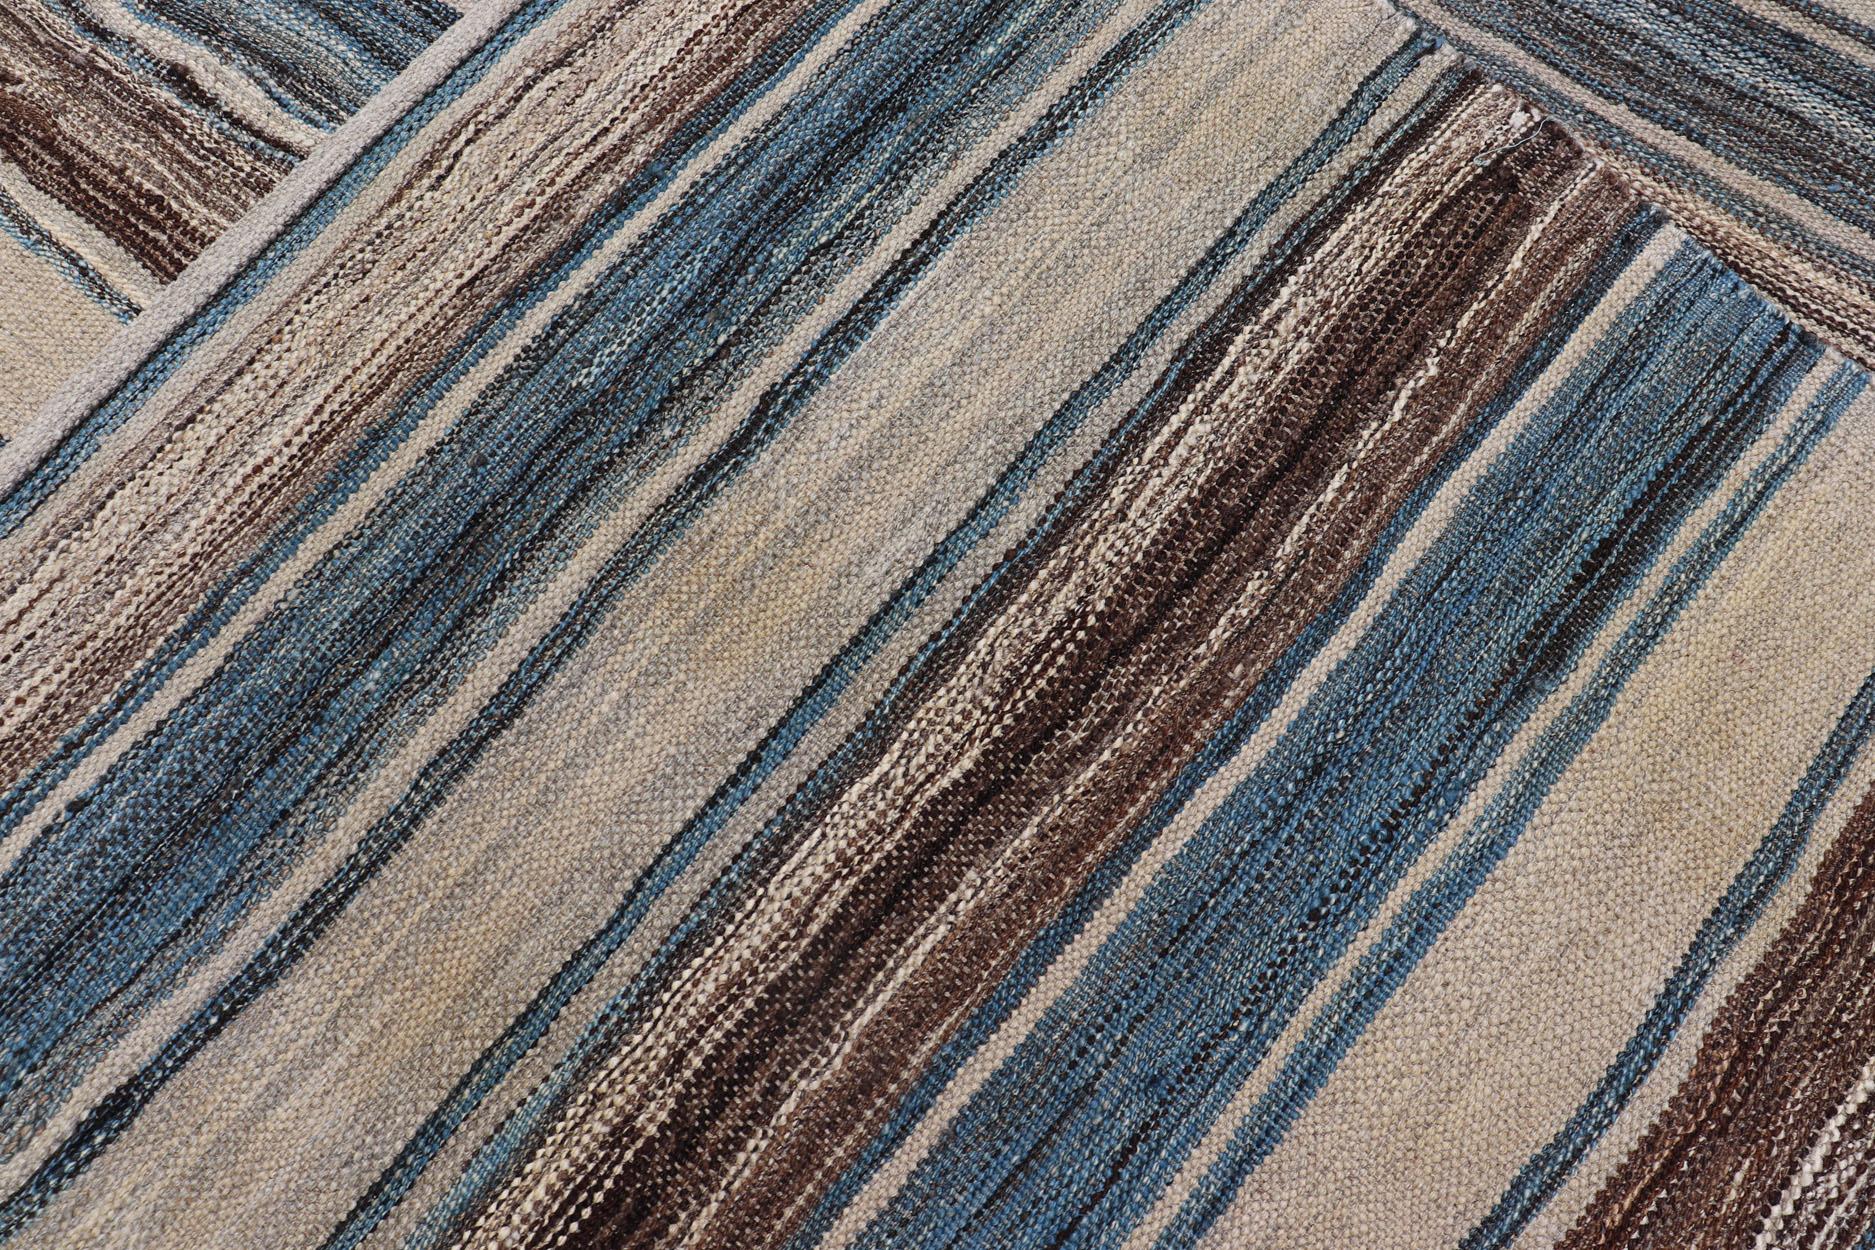 Versatile Striped Design and Natural Brown, Cream, and Blue Flat-Weave Kilim For Sale 6